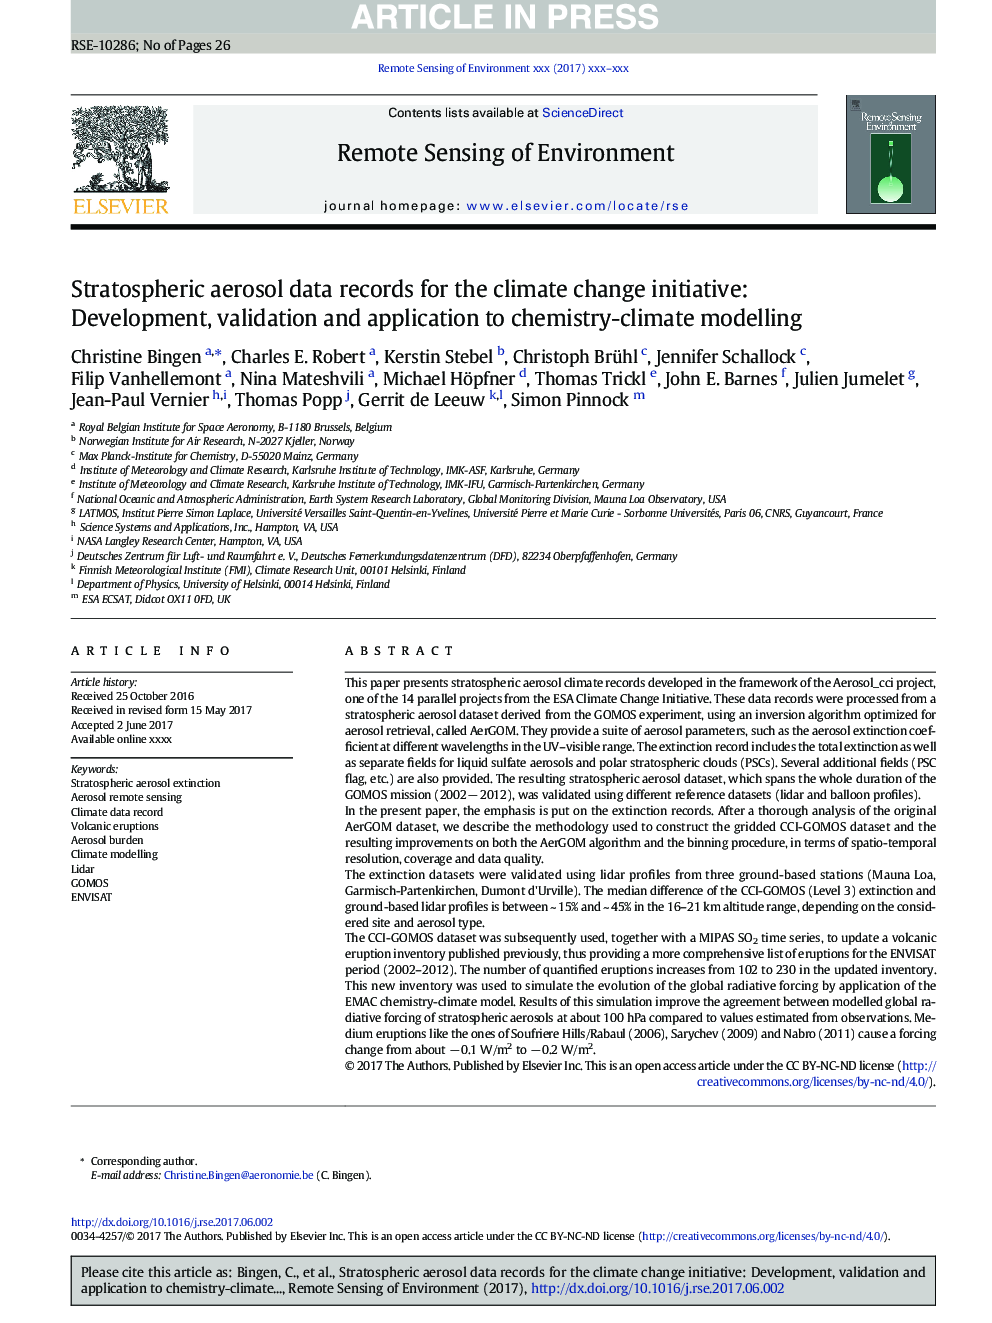 Stratospheric aerosol data records for the climate change initiative: Development, validation and application to chemistry-climate modelling